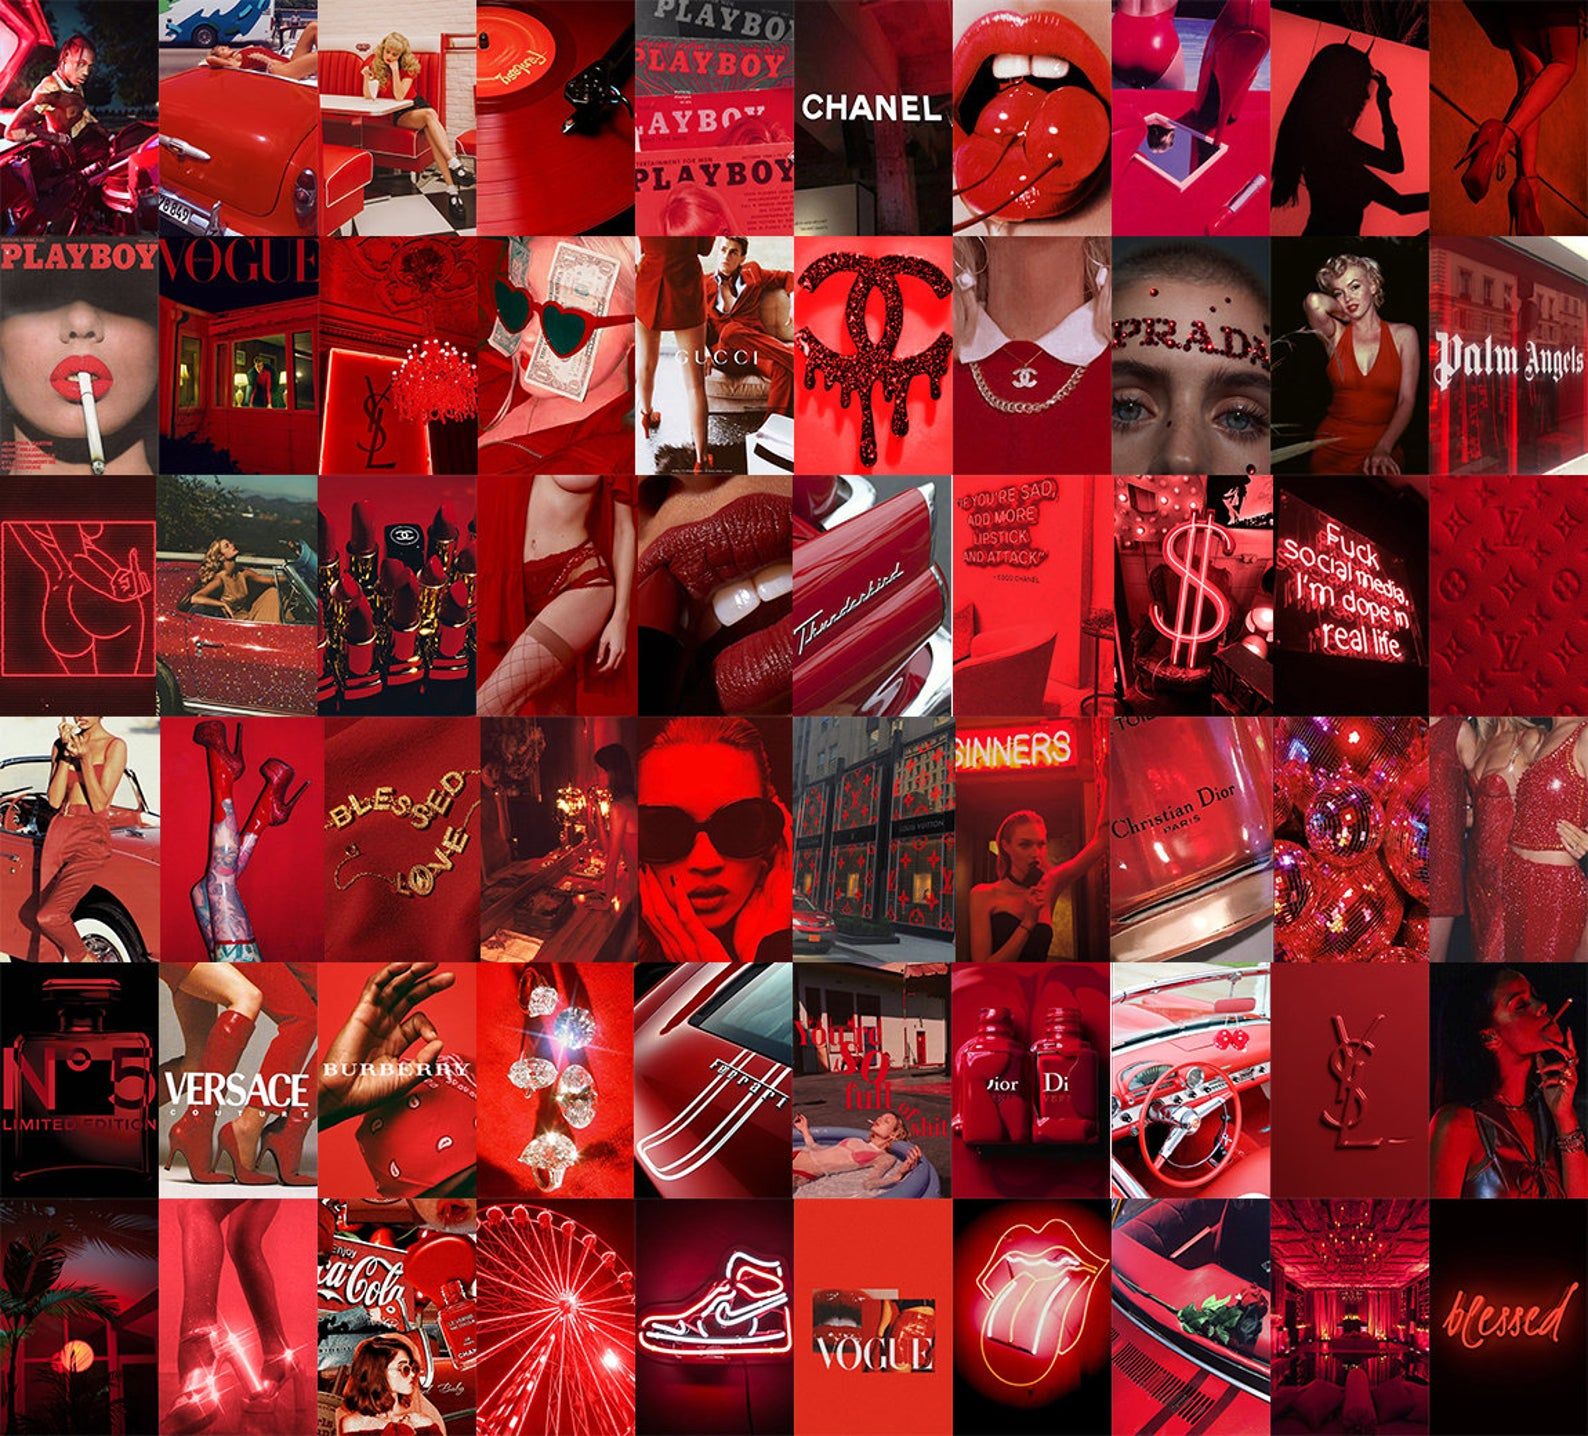 Boujee Red Aesthetic Wall Collage Kit Neon Red Wall Collage. Etsy. Wall collage, Red wall art, Red aesthetic